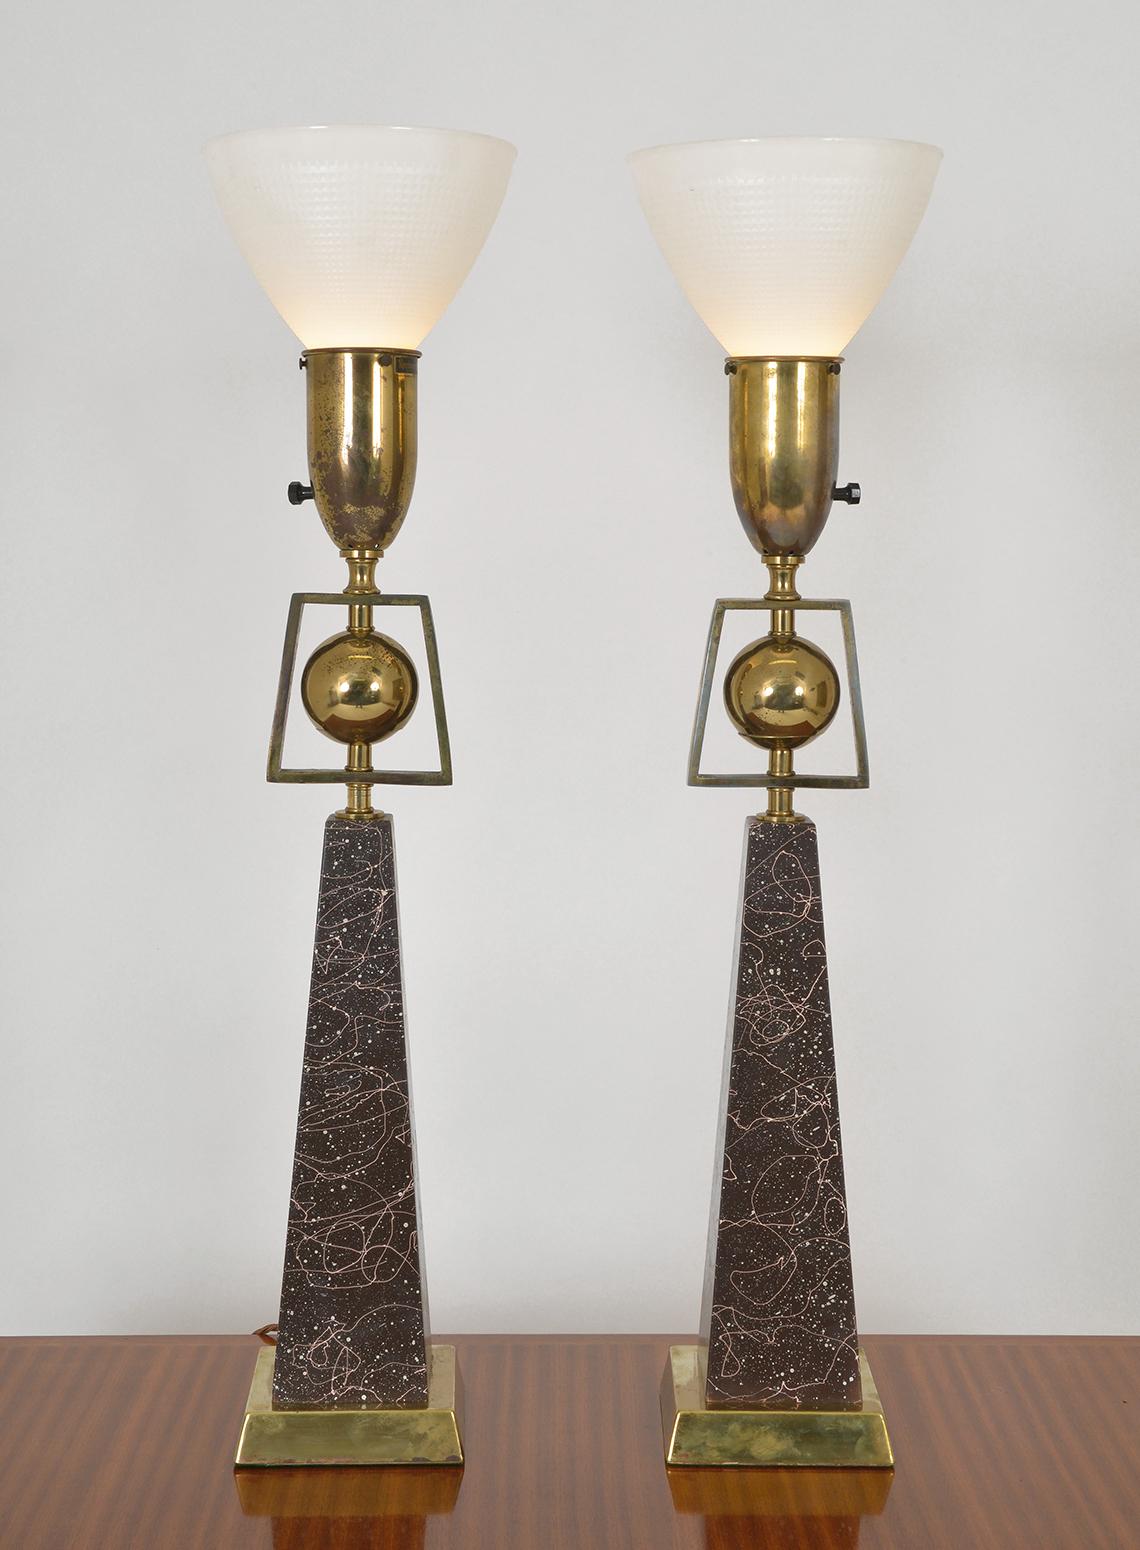 Mid-20th Century Pair of American Mid-Century Modern Obelisk Table Lamps by Rembrandt Lighting